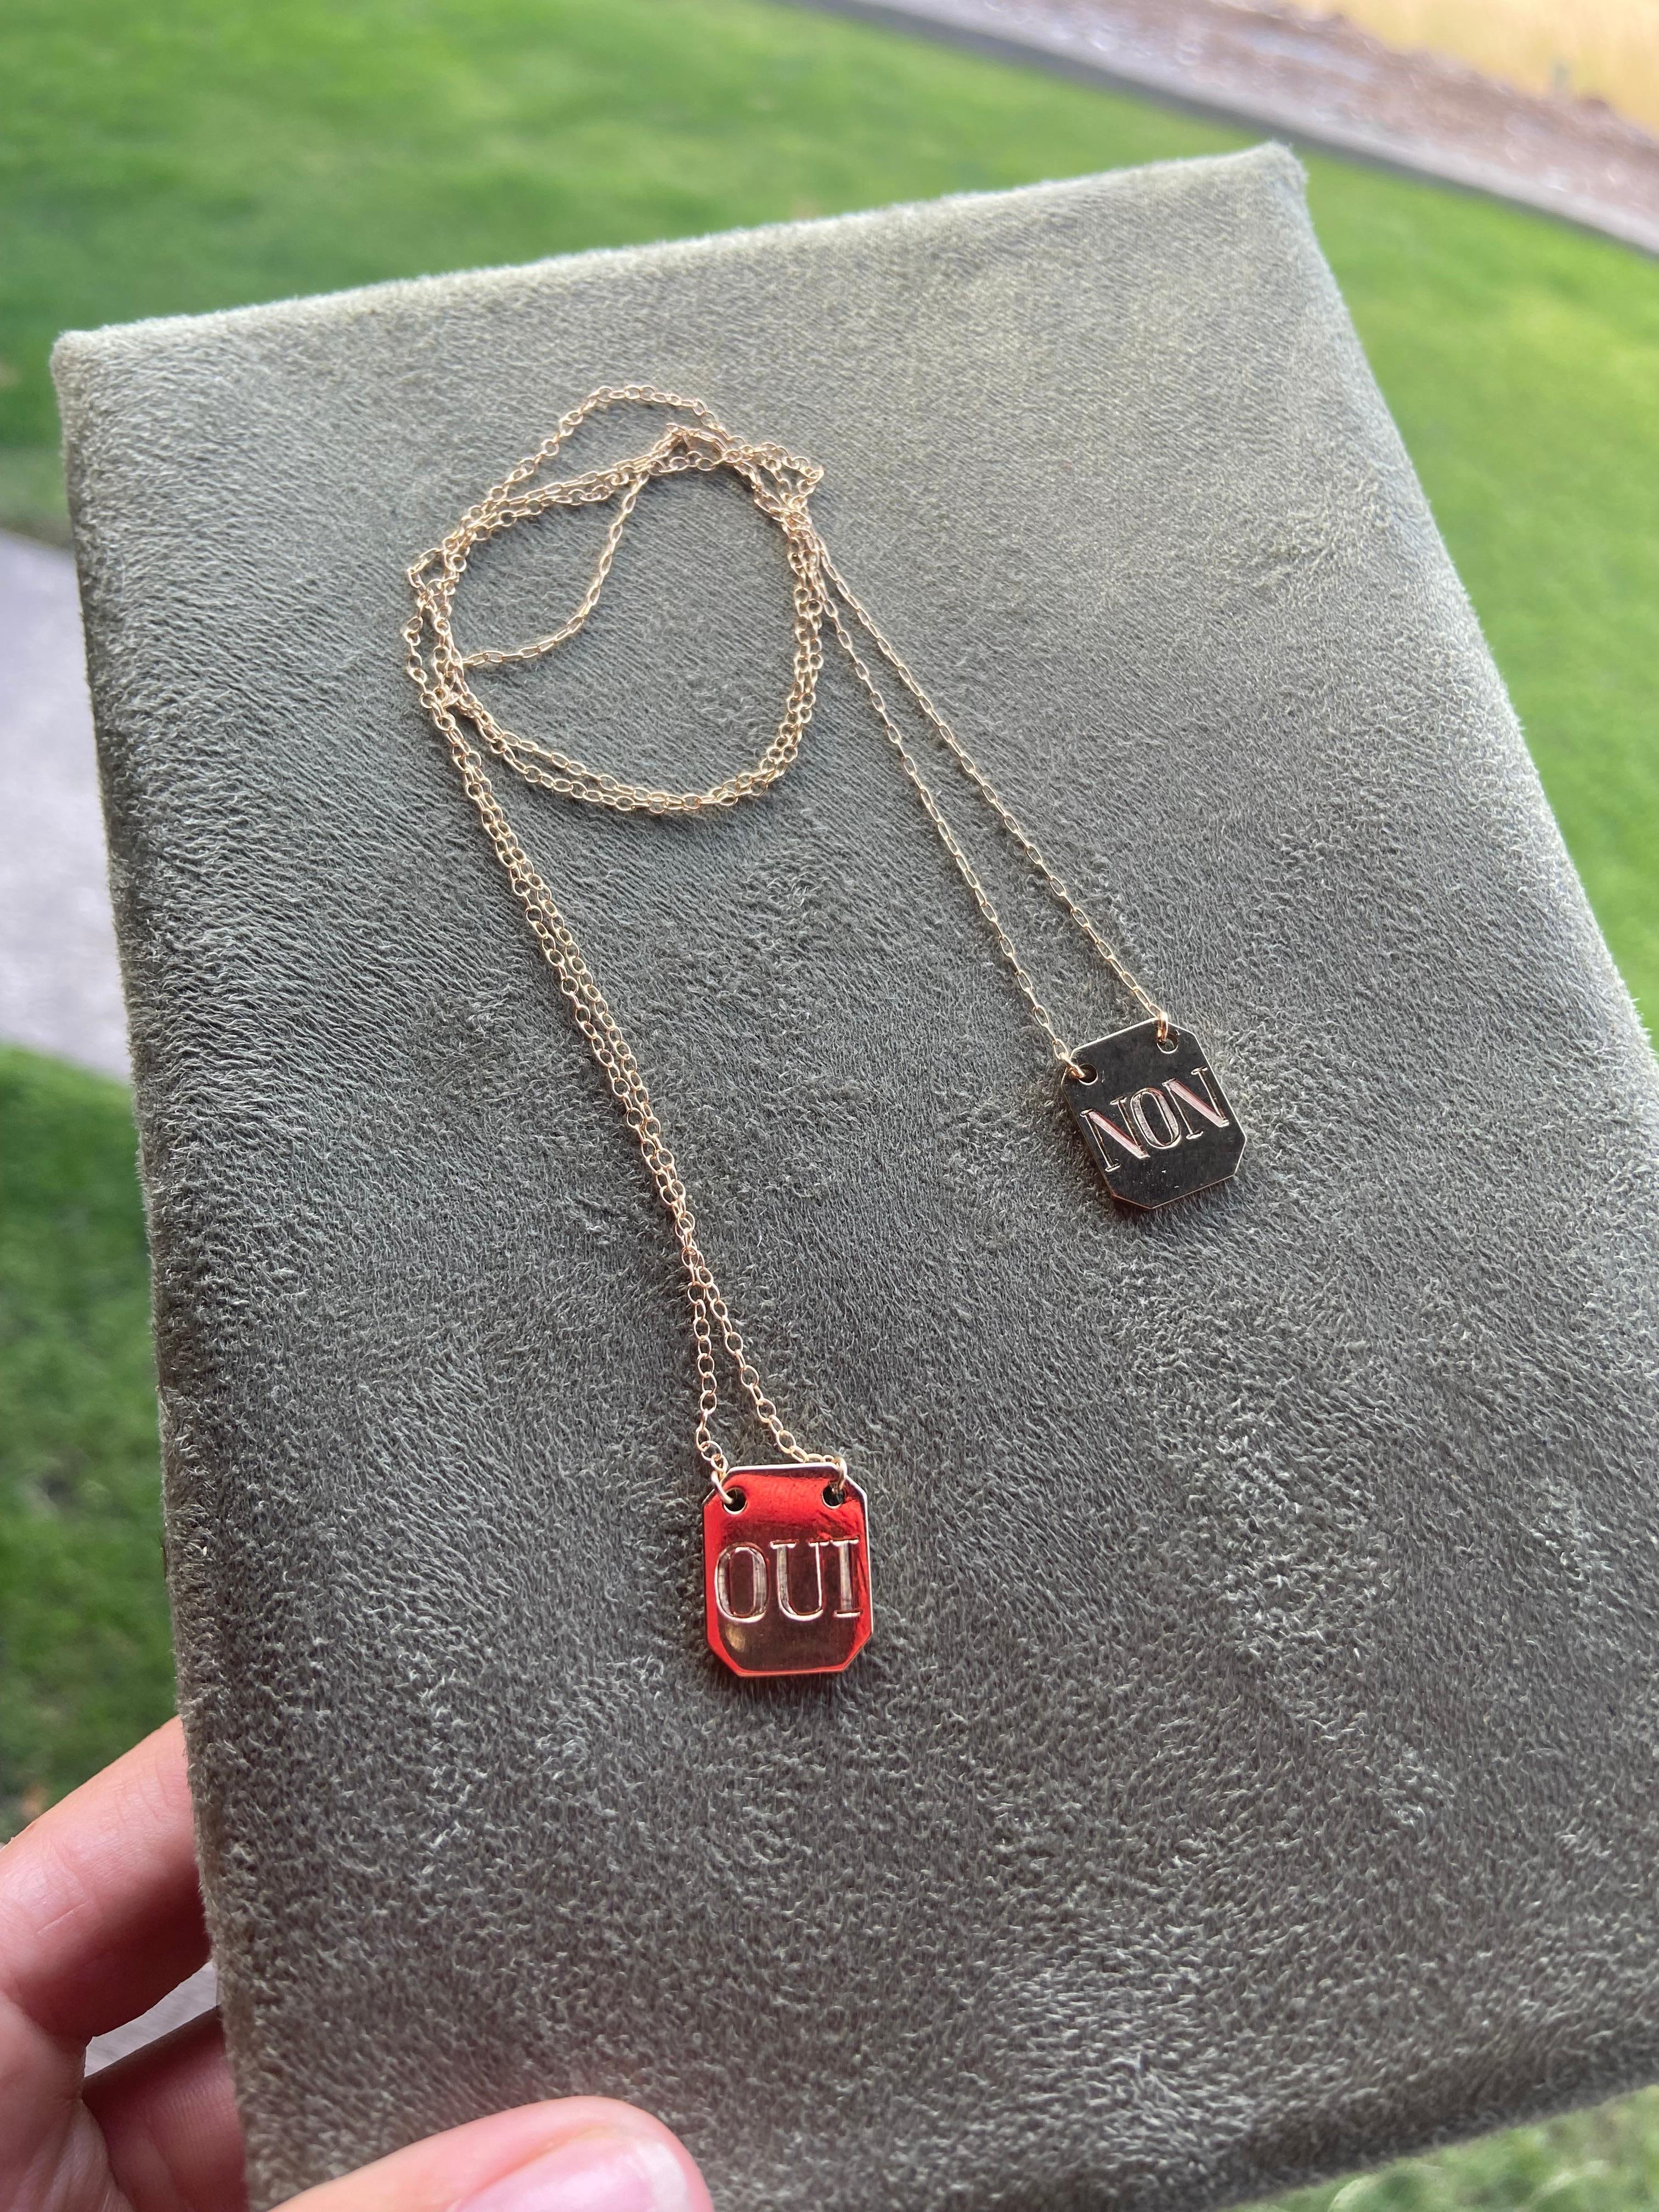 OUI/NON Scapular Necklace (Tag Necklace) In New Condition For Sale In Missoula, MT